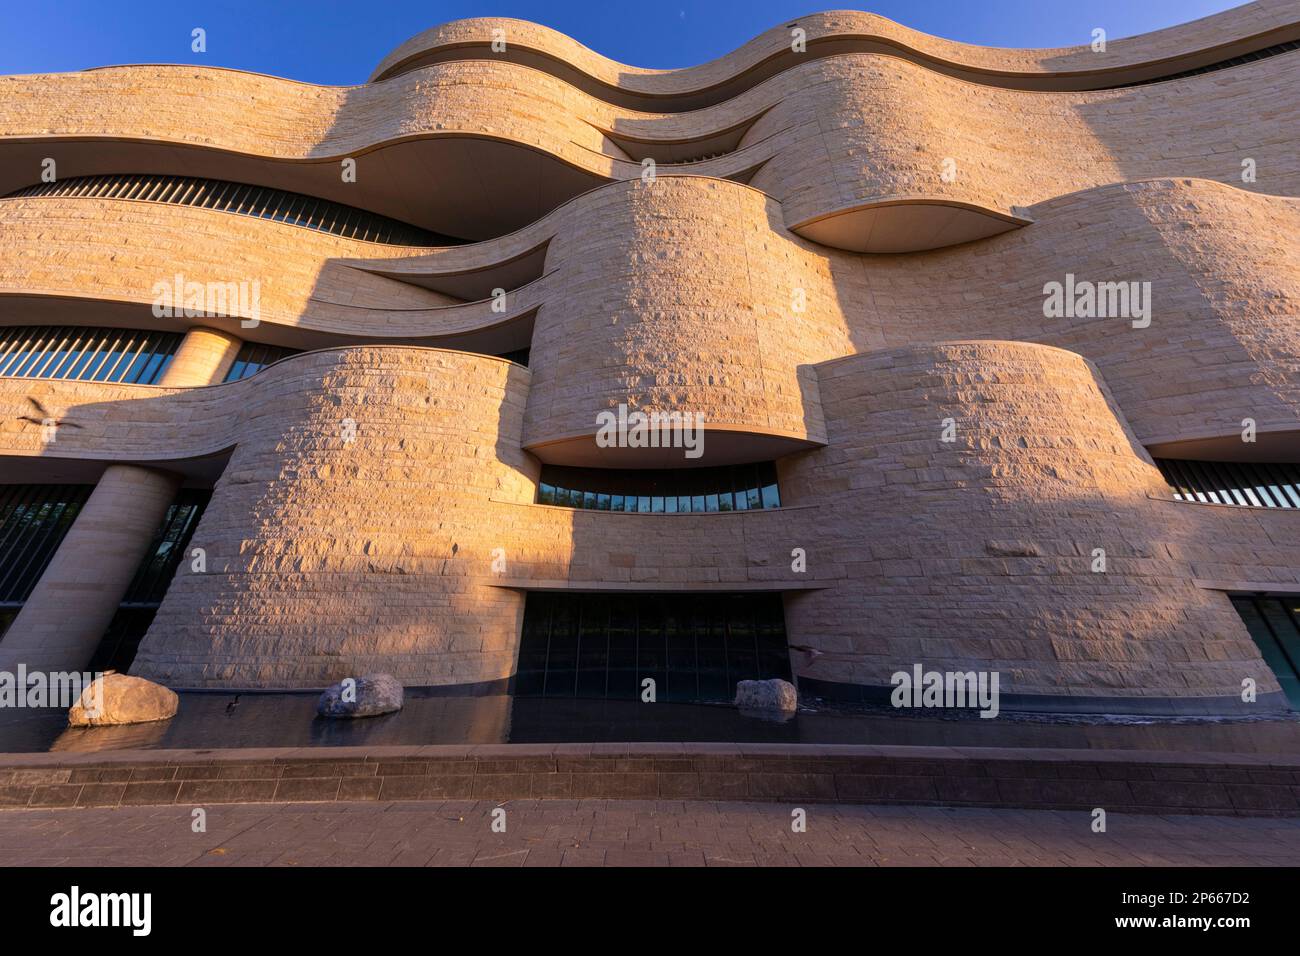 The Smithsonian Institution National Museum of the American Indian on the National Mall, Washington, D.C., United States of America, North America Stock Photo